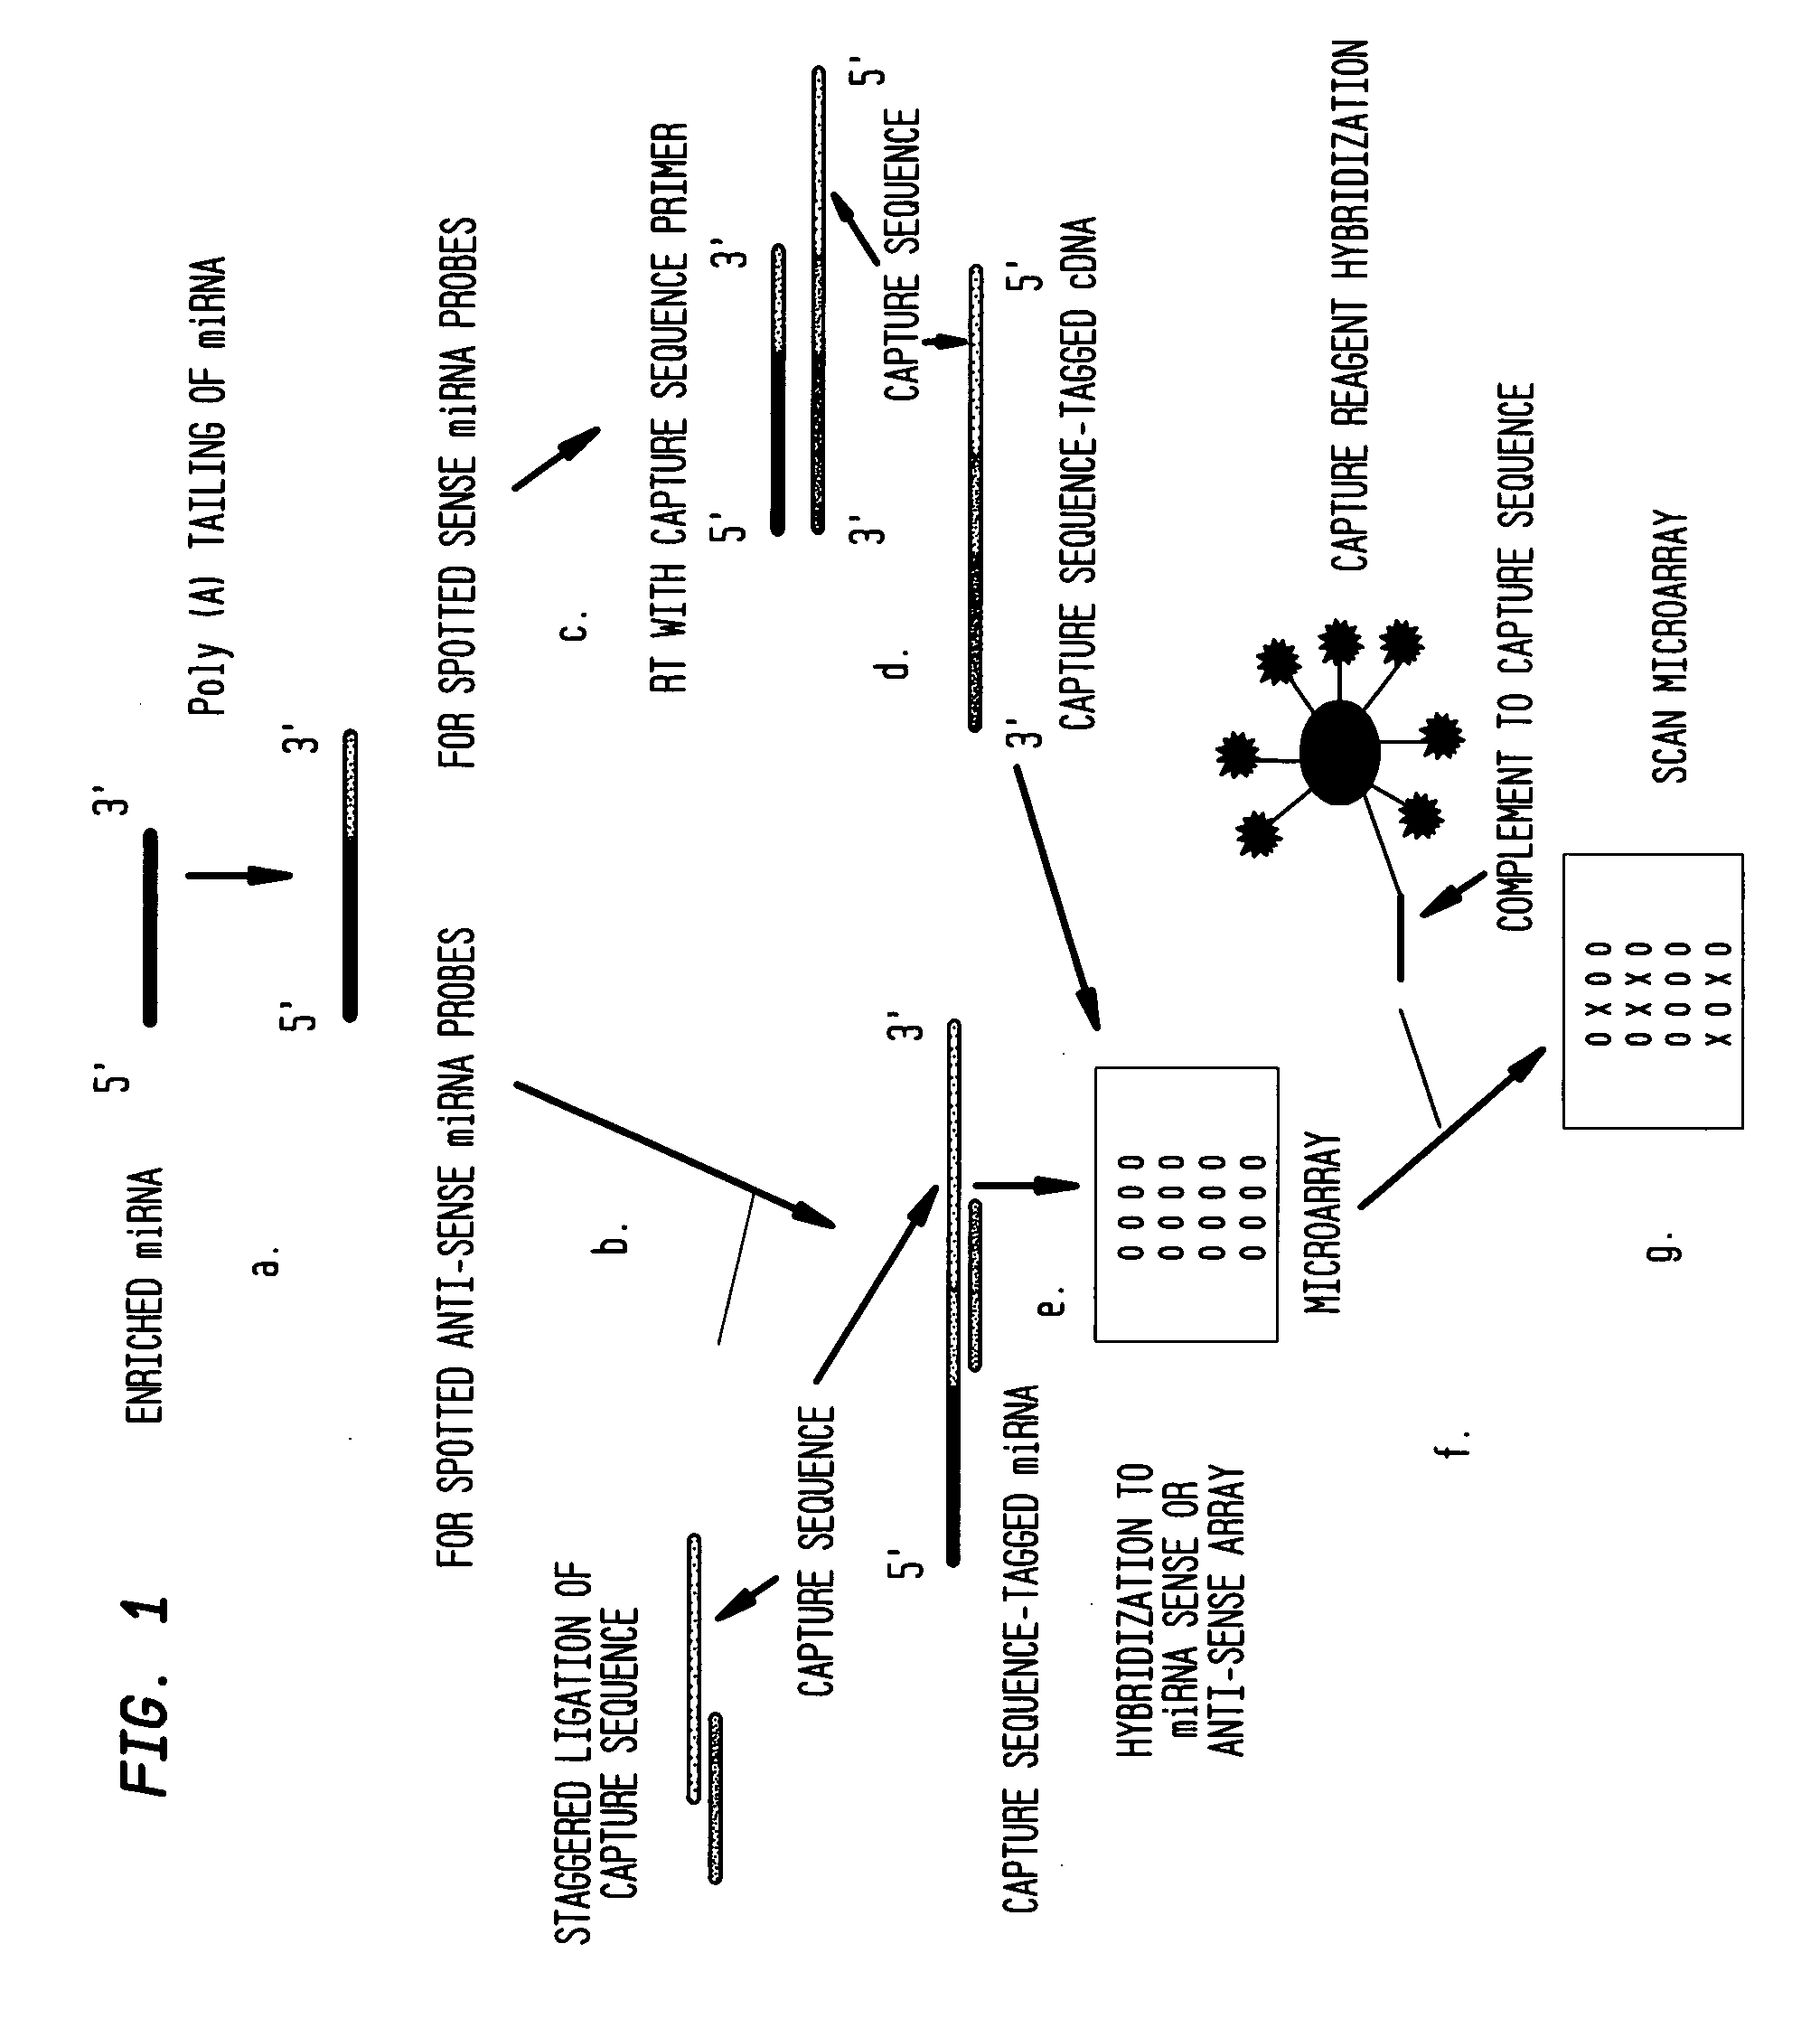 Methods for detection of microrna molecules